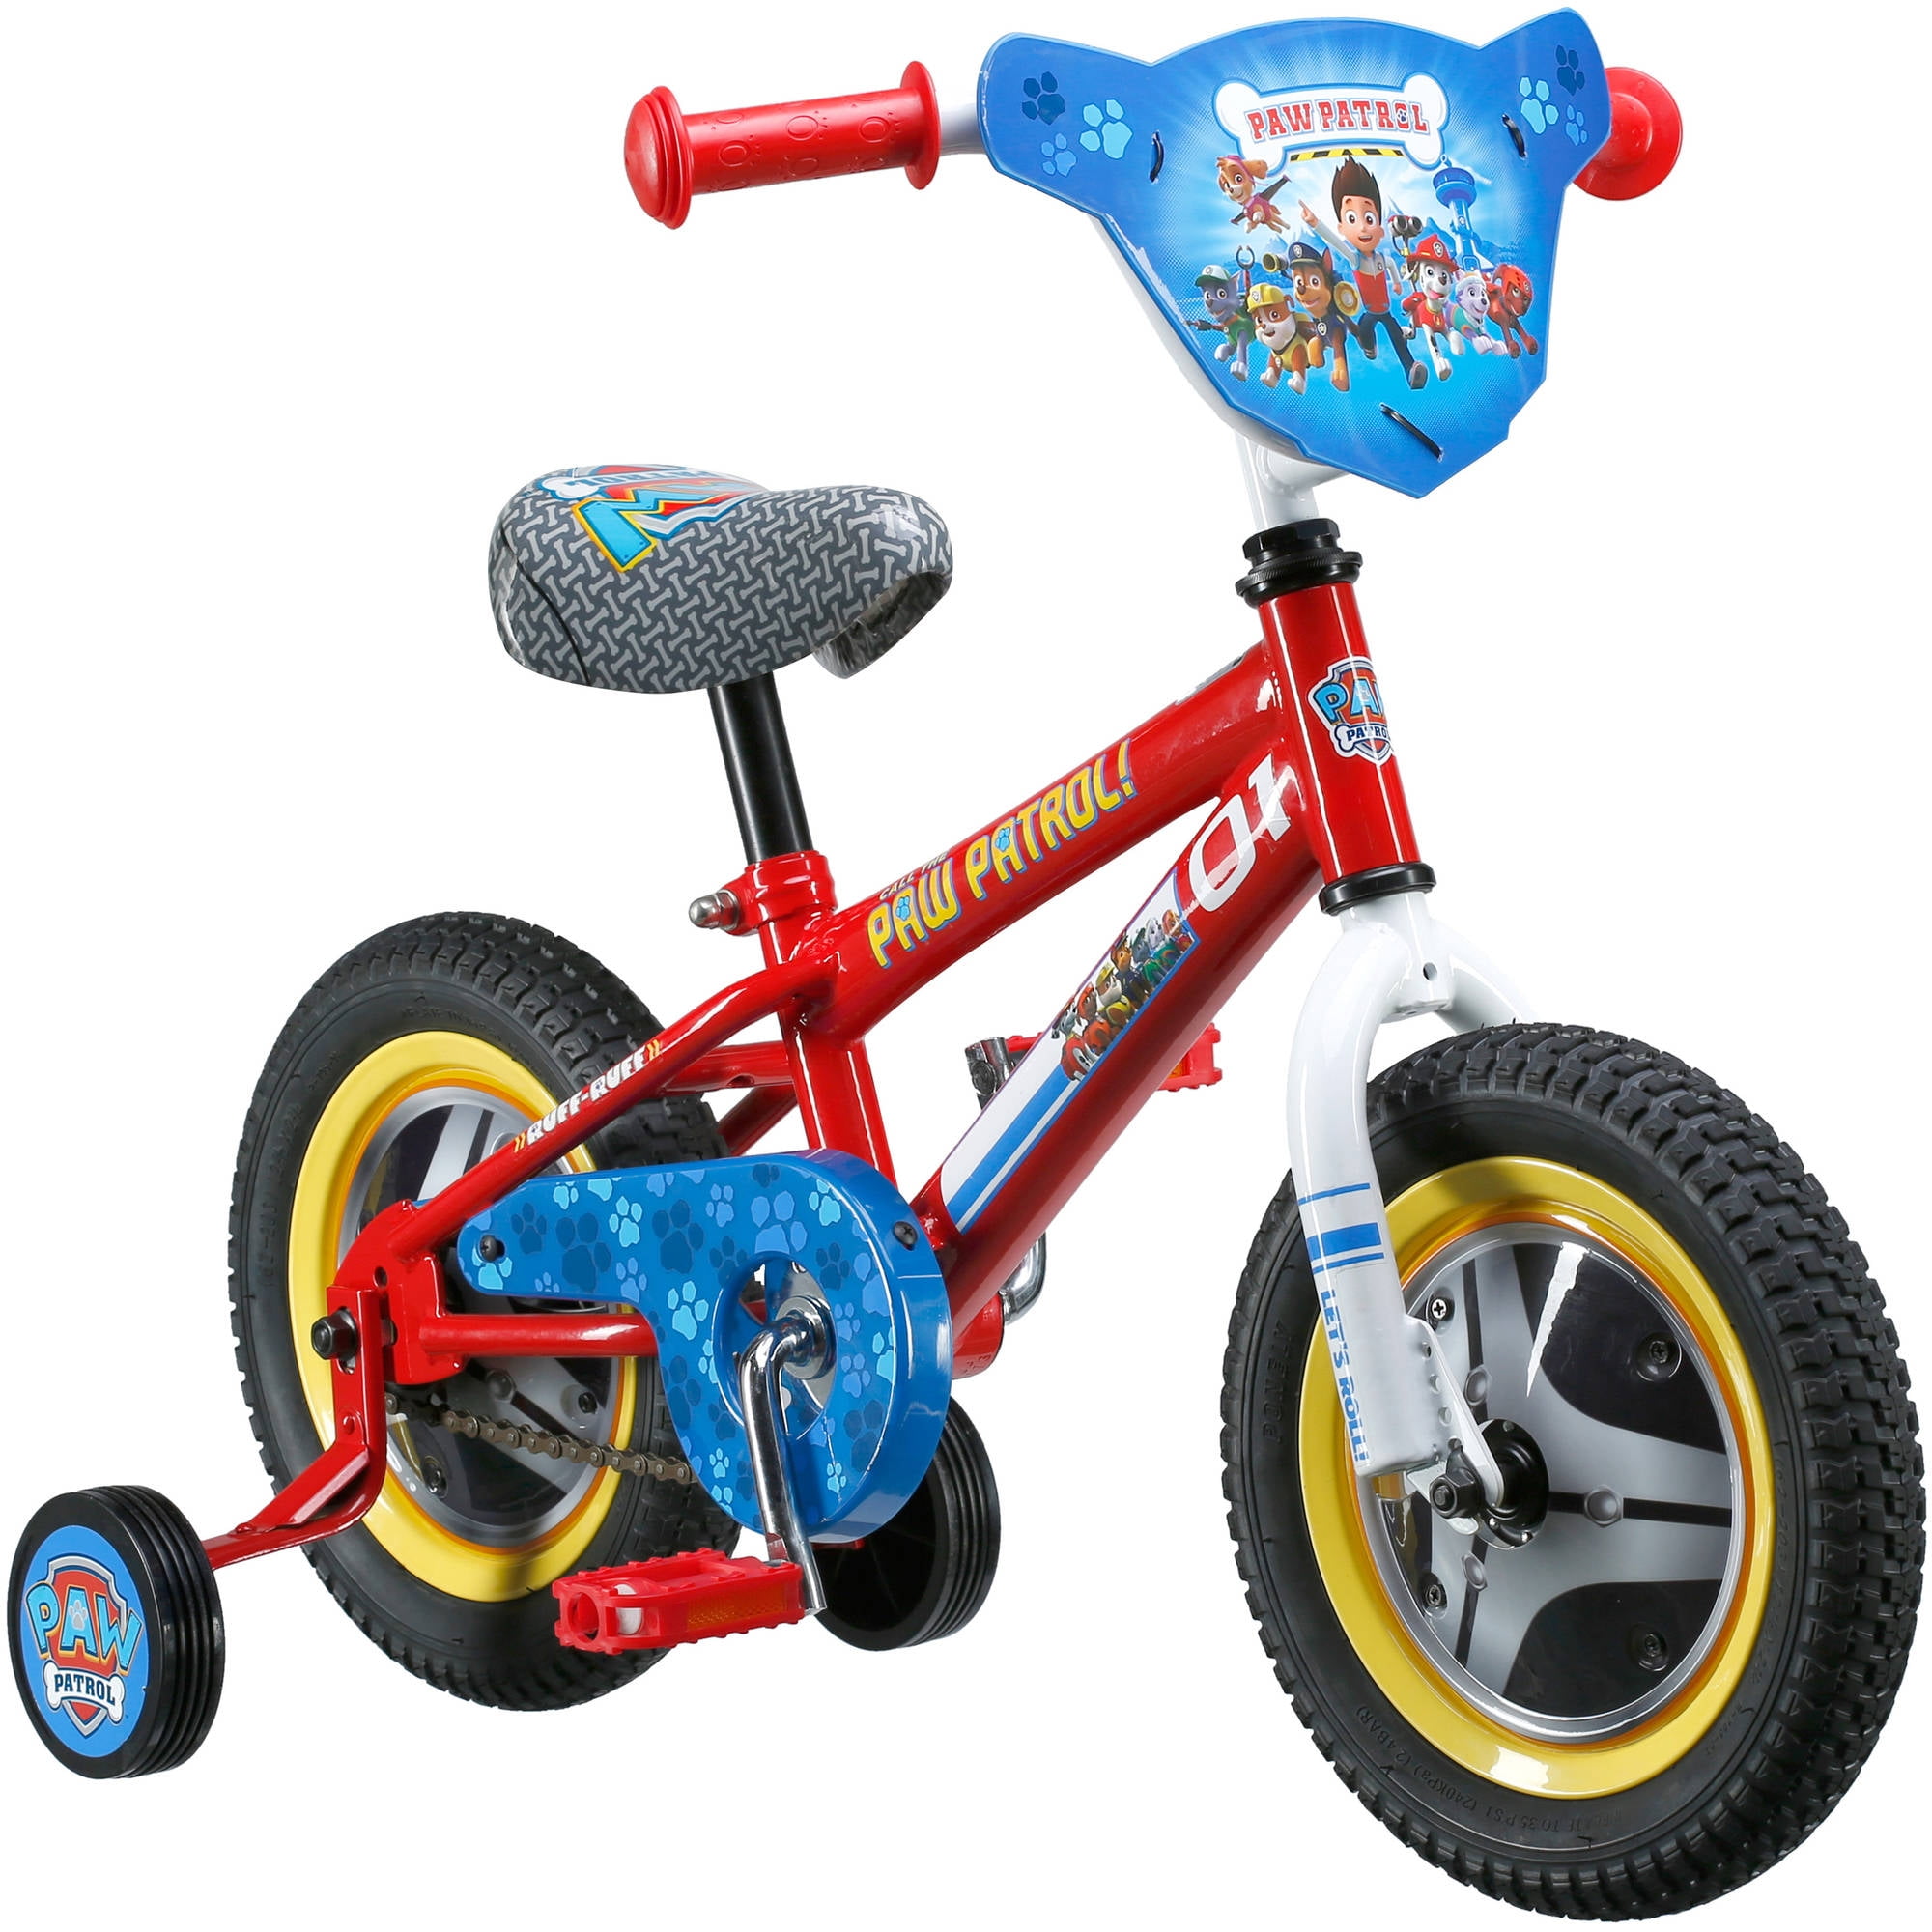 Nickelodeon 16 inch Paw Patrol All Character Bike Bicycle for Kids 